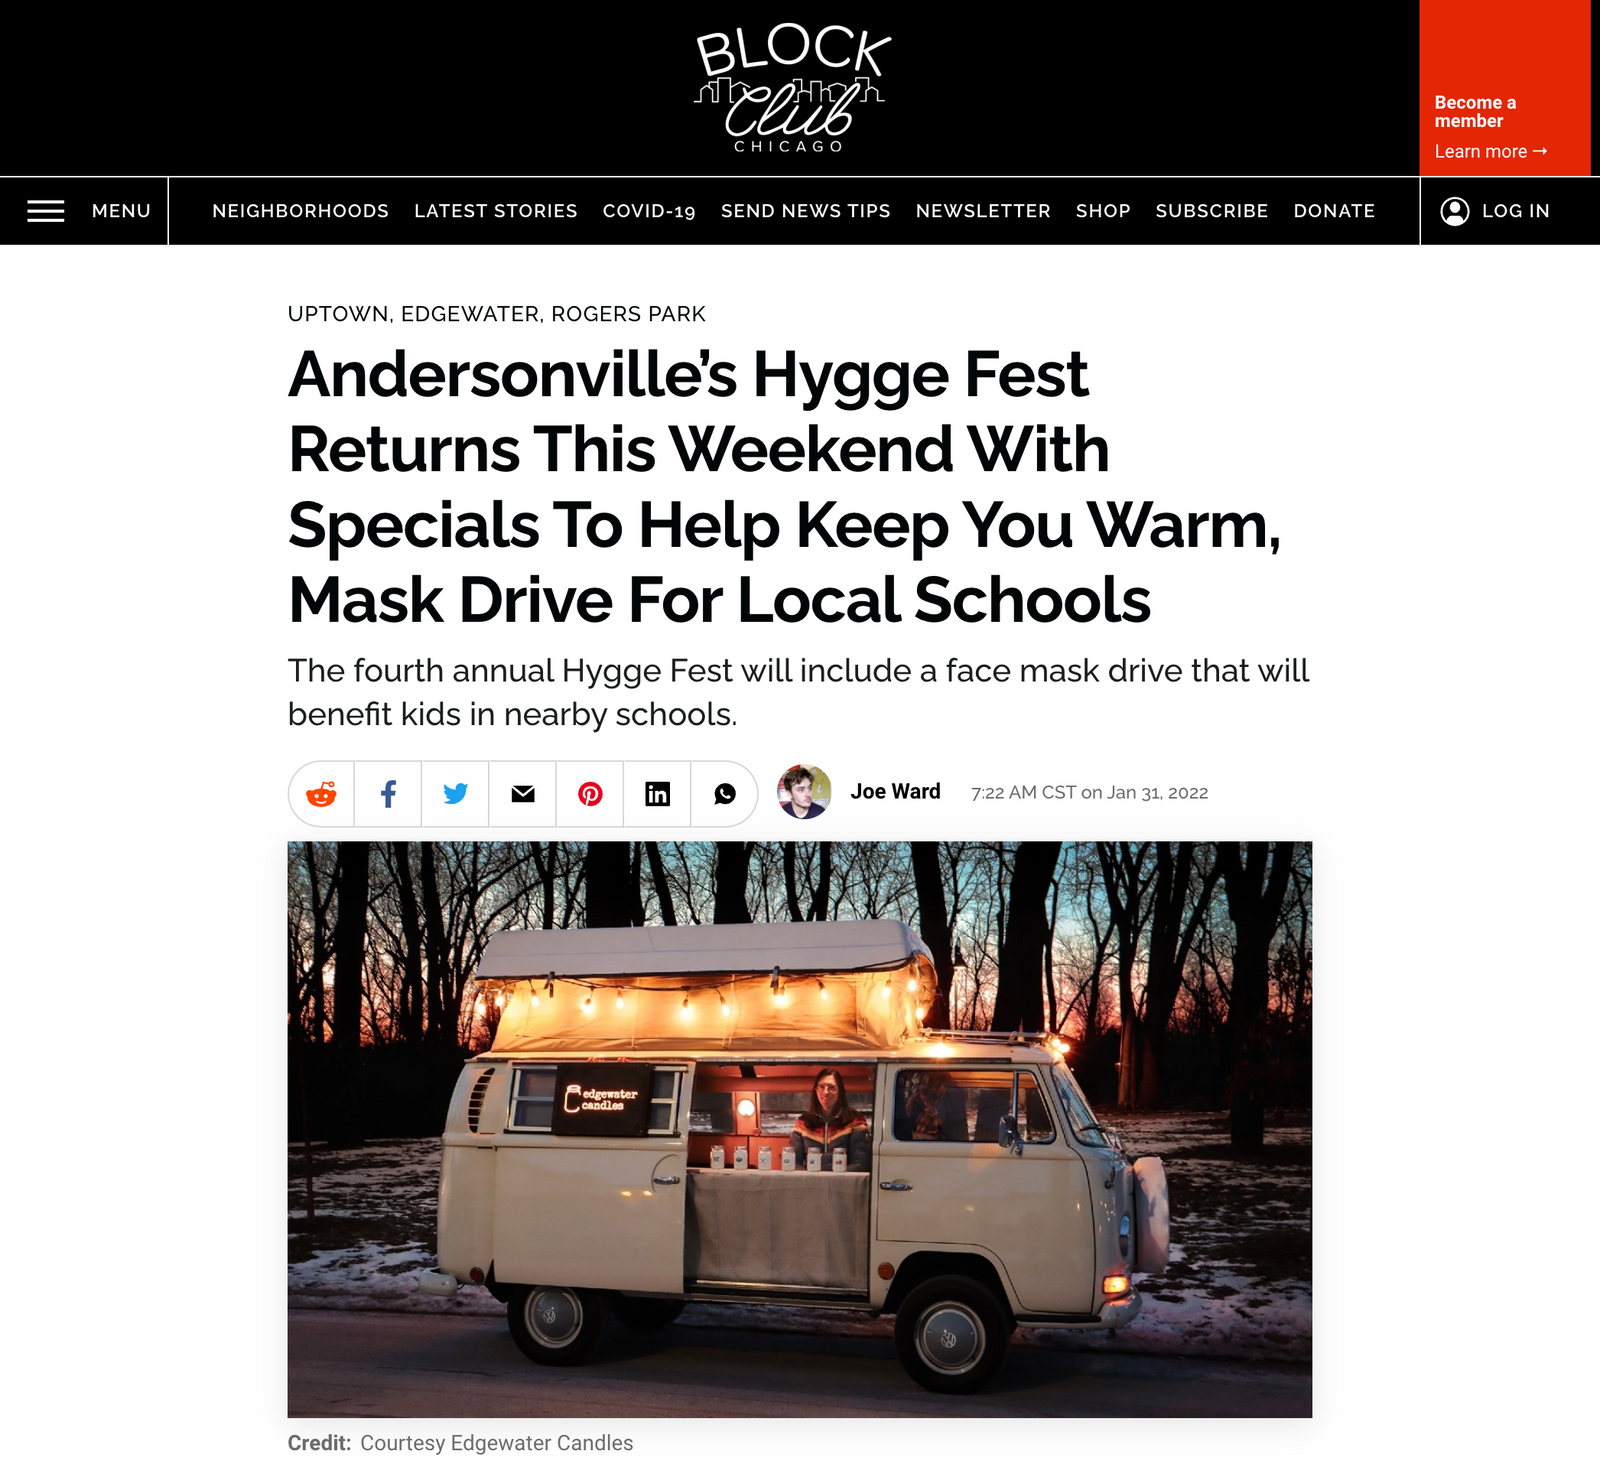 Block Club Chicago features the Candle Camper for Andersonville Hygge Fest